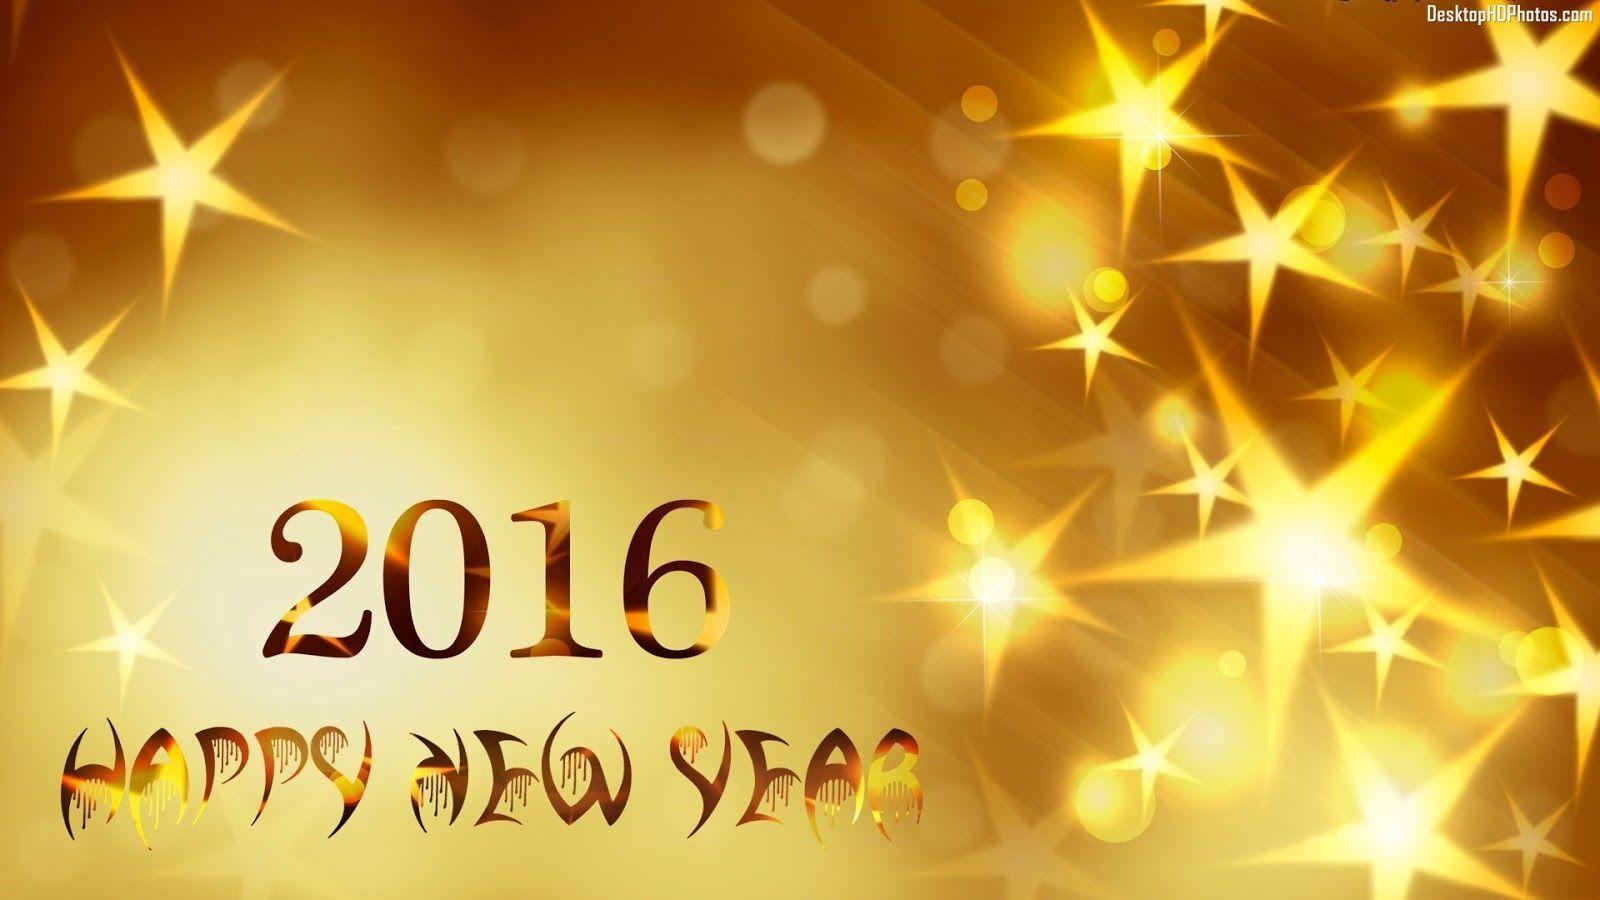 Happy New Year 2016 HD Image, Animated Wallpaper, Wishes